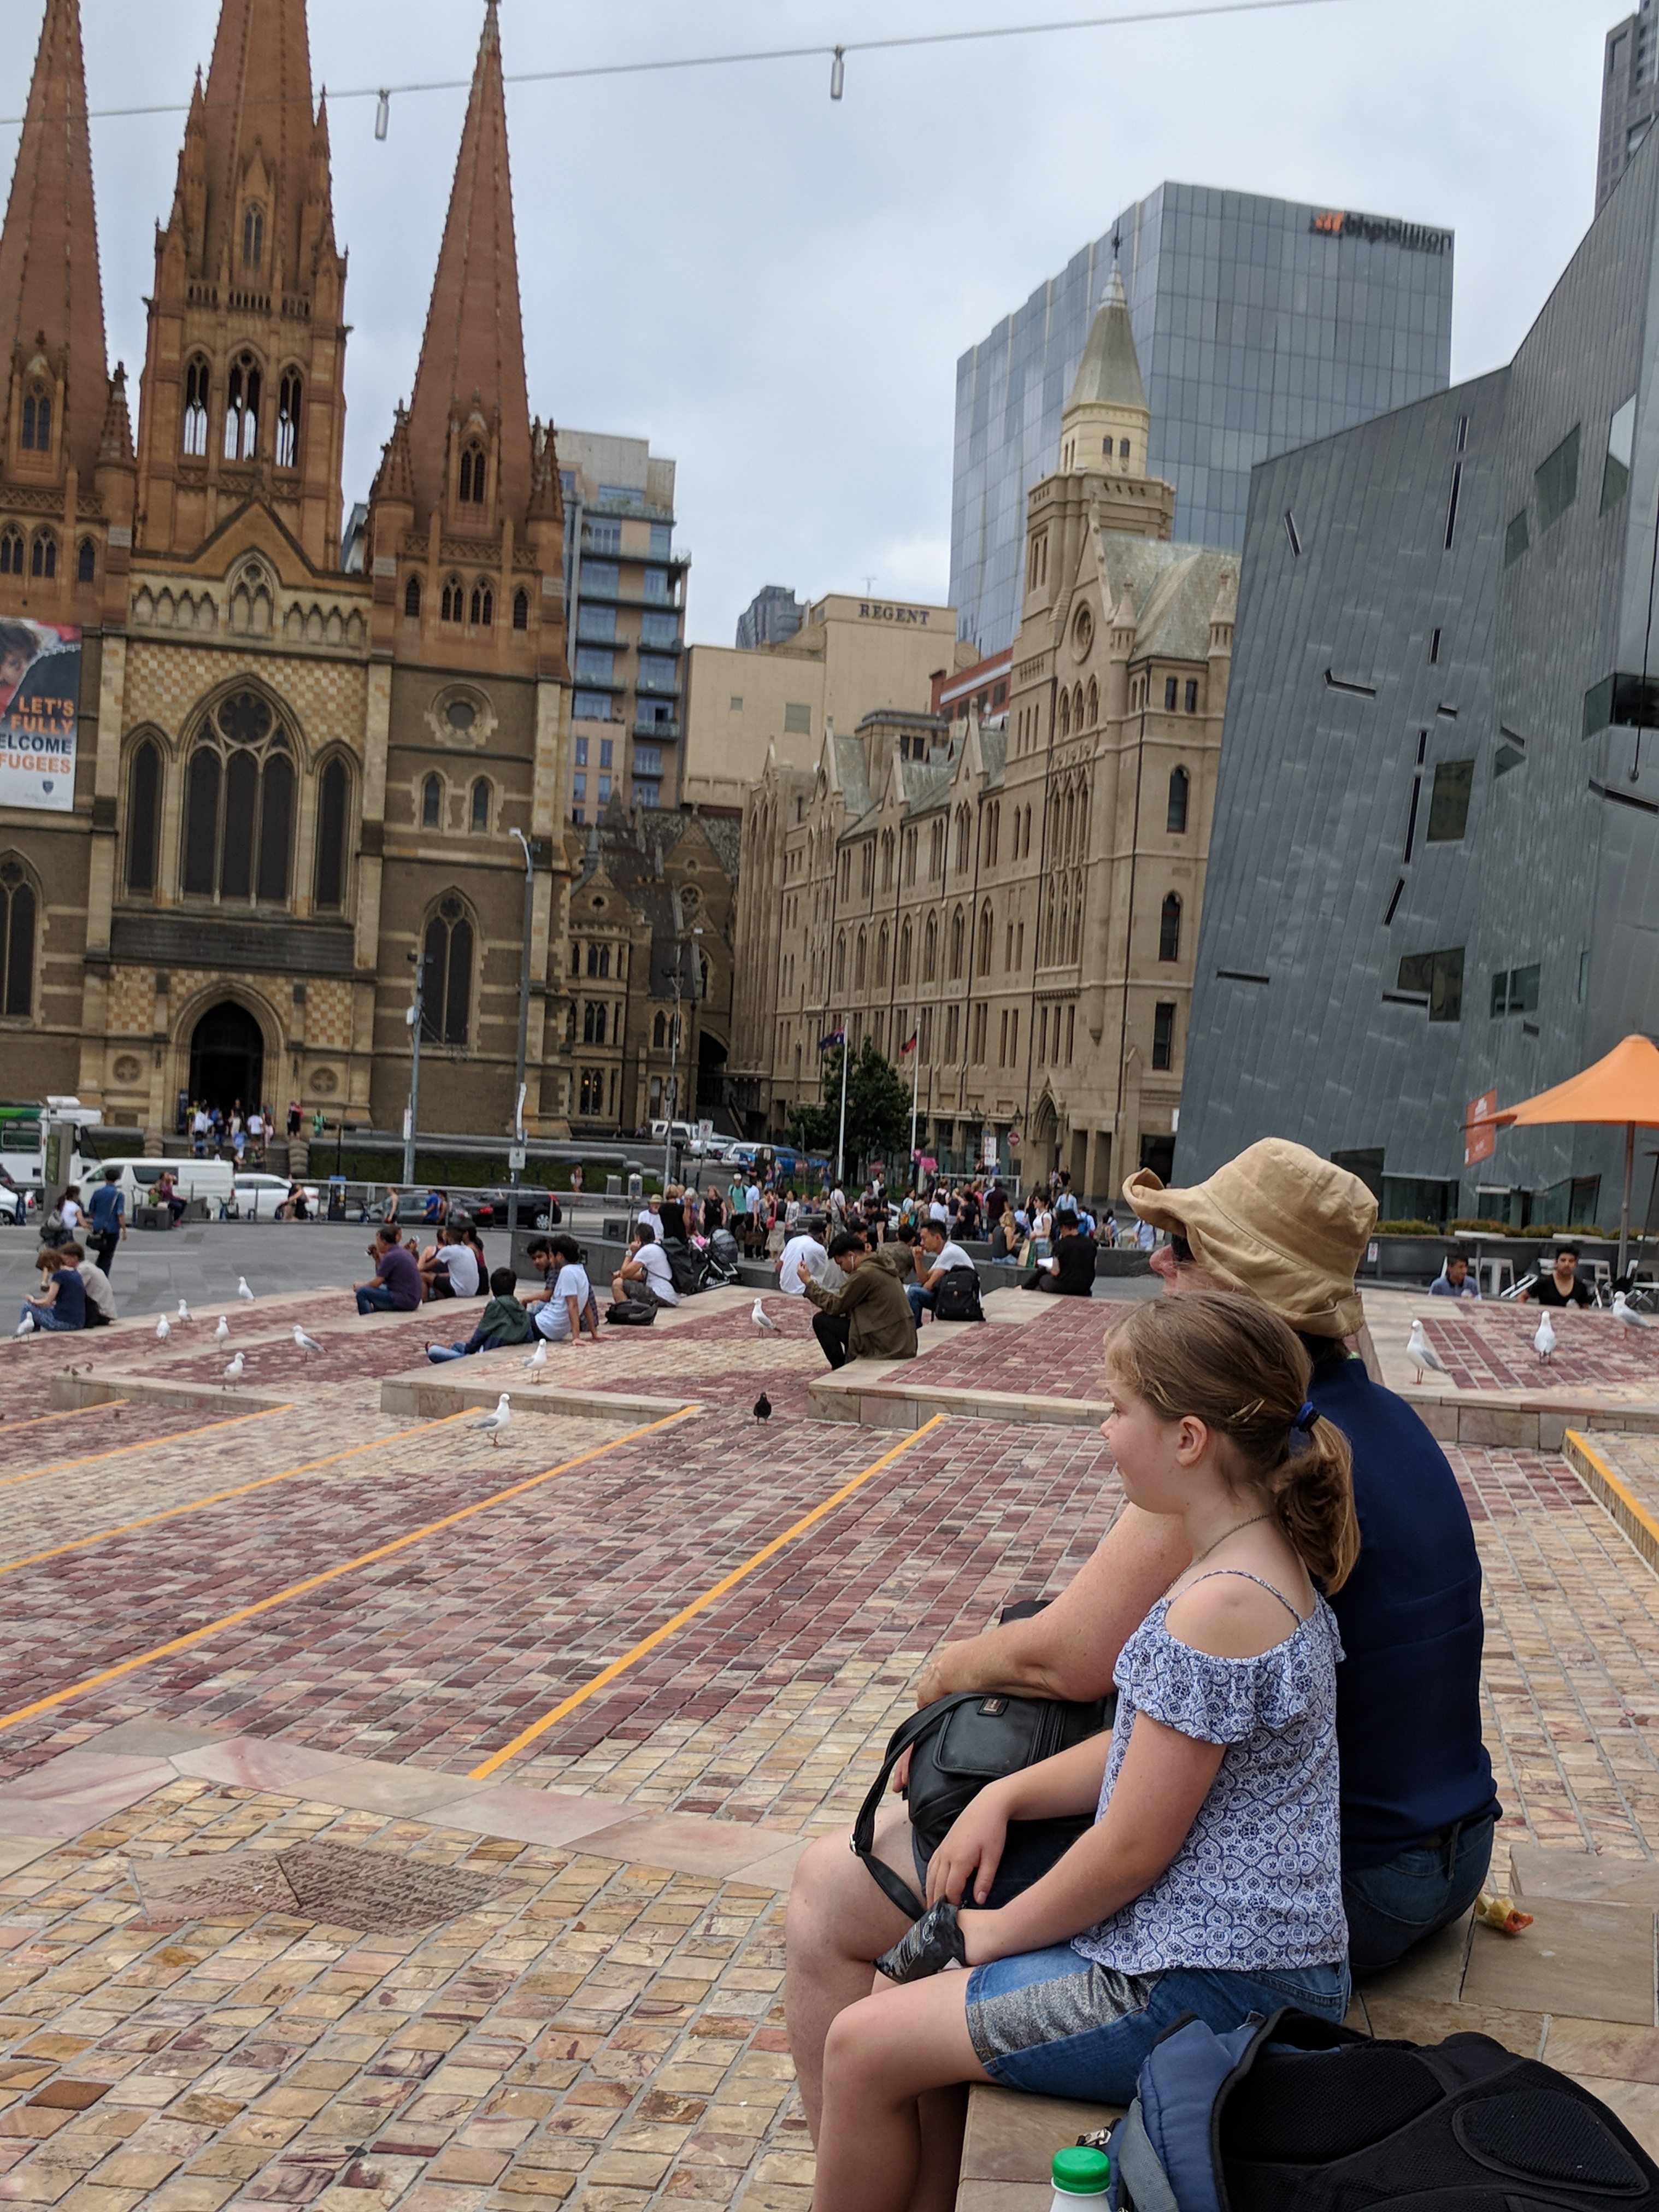 206--finally to iconic Federation Square